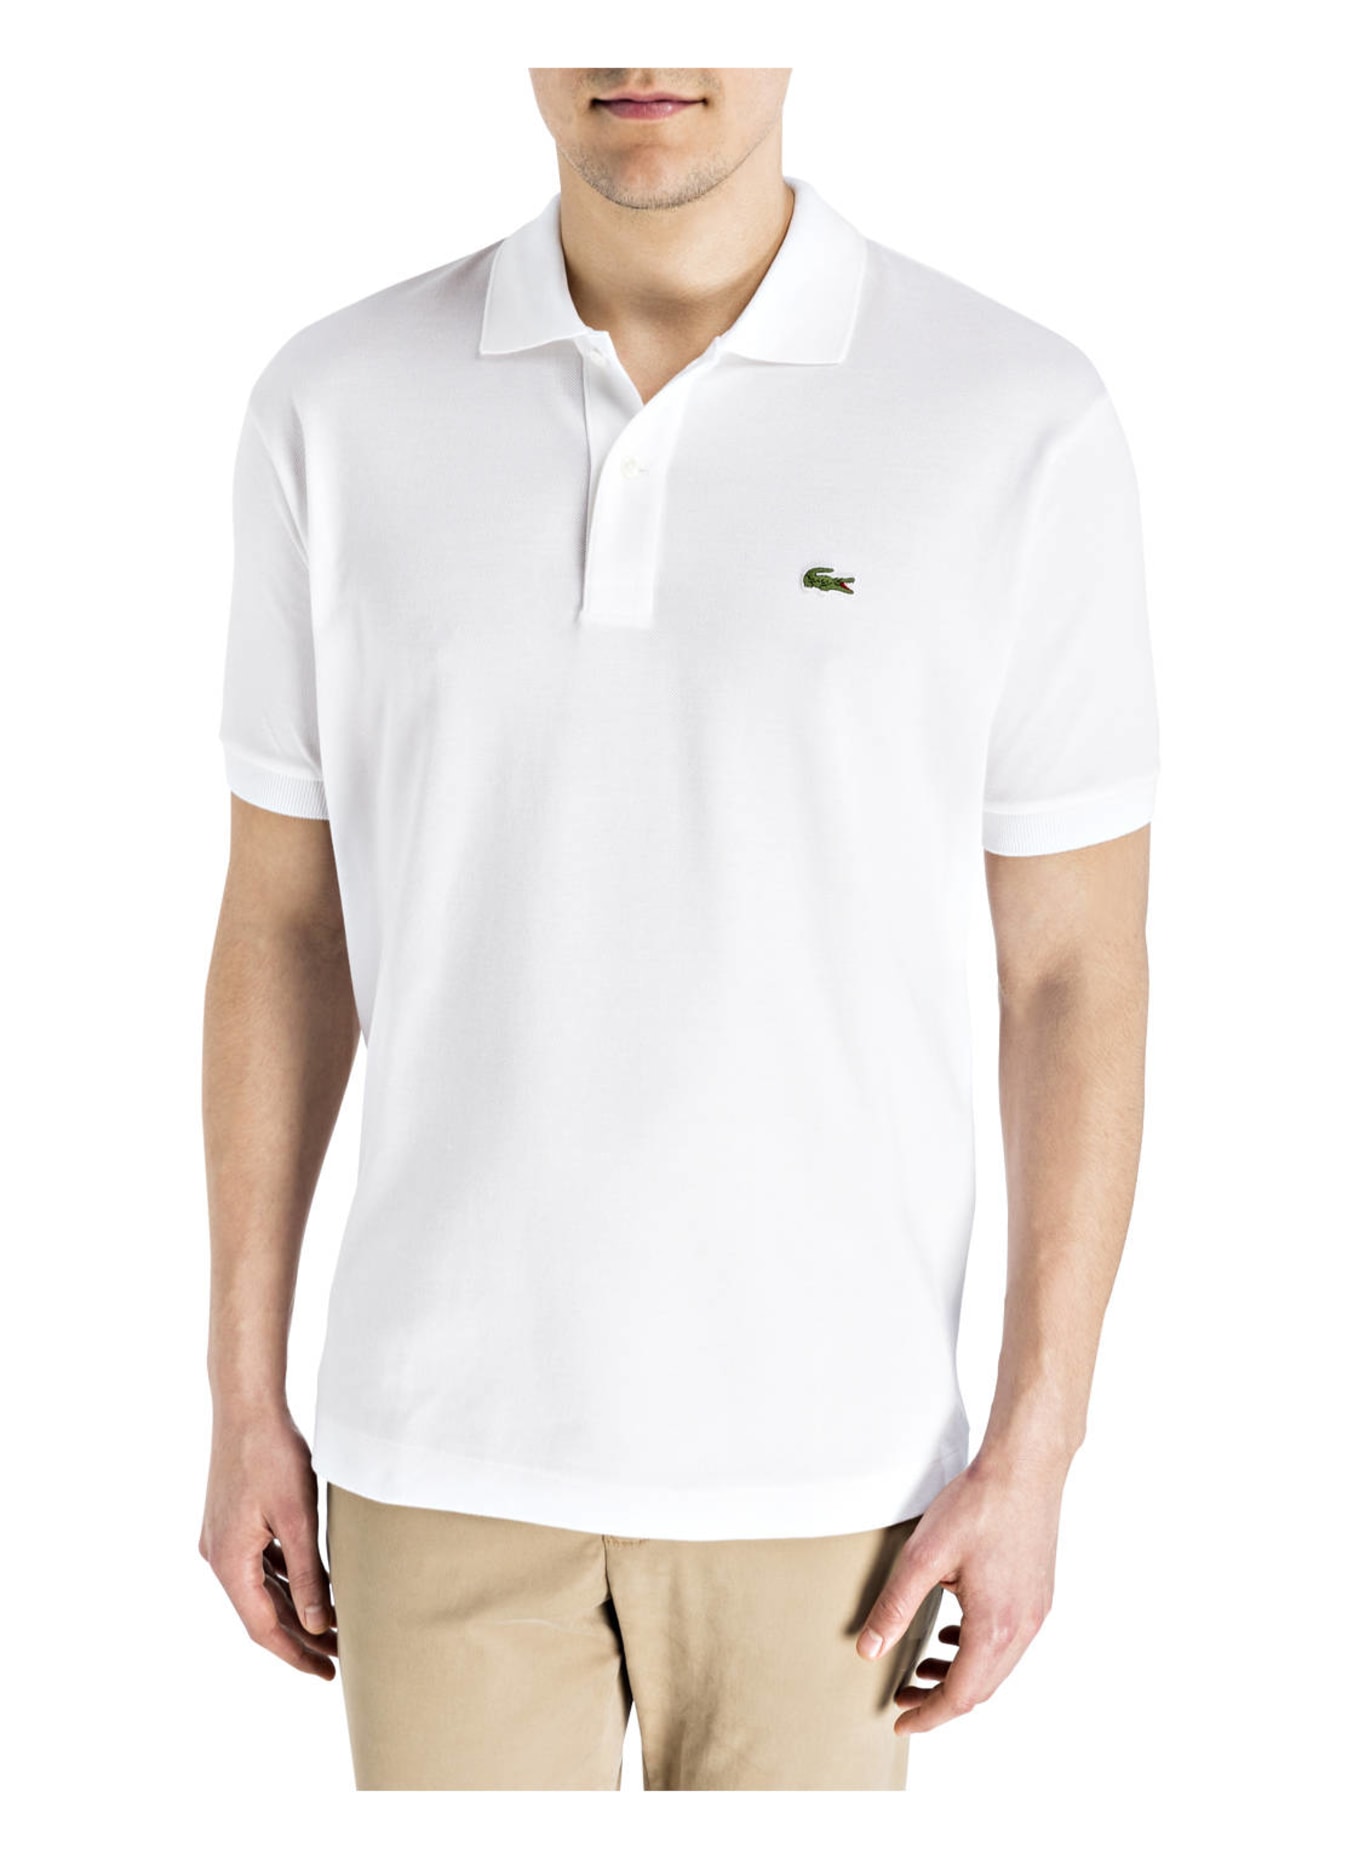 LACOSTE Piqué-Poloshirt Classic Fit in weiss